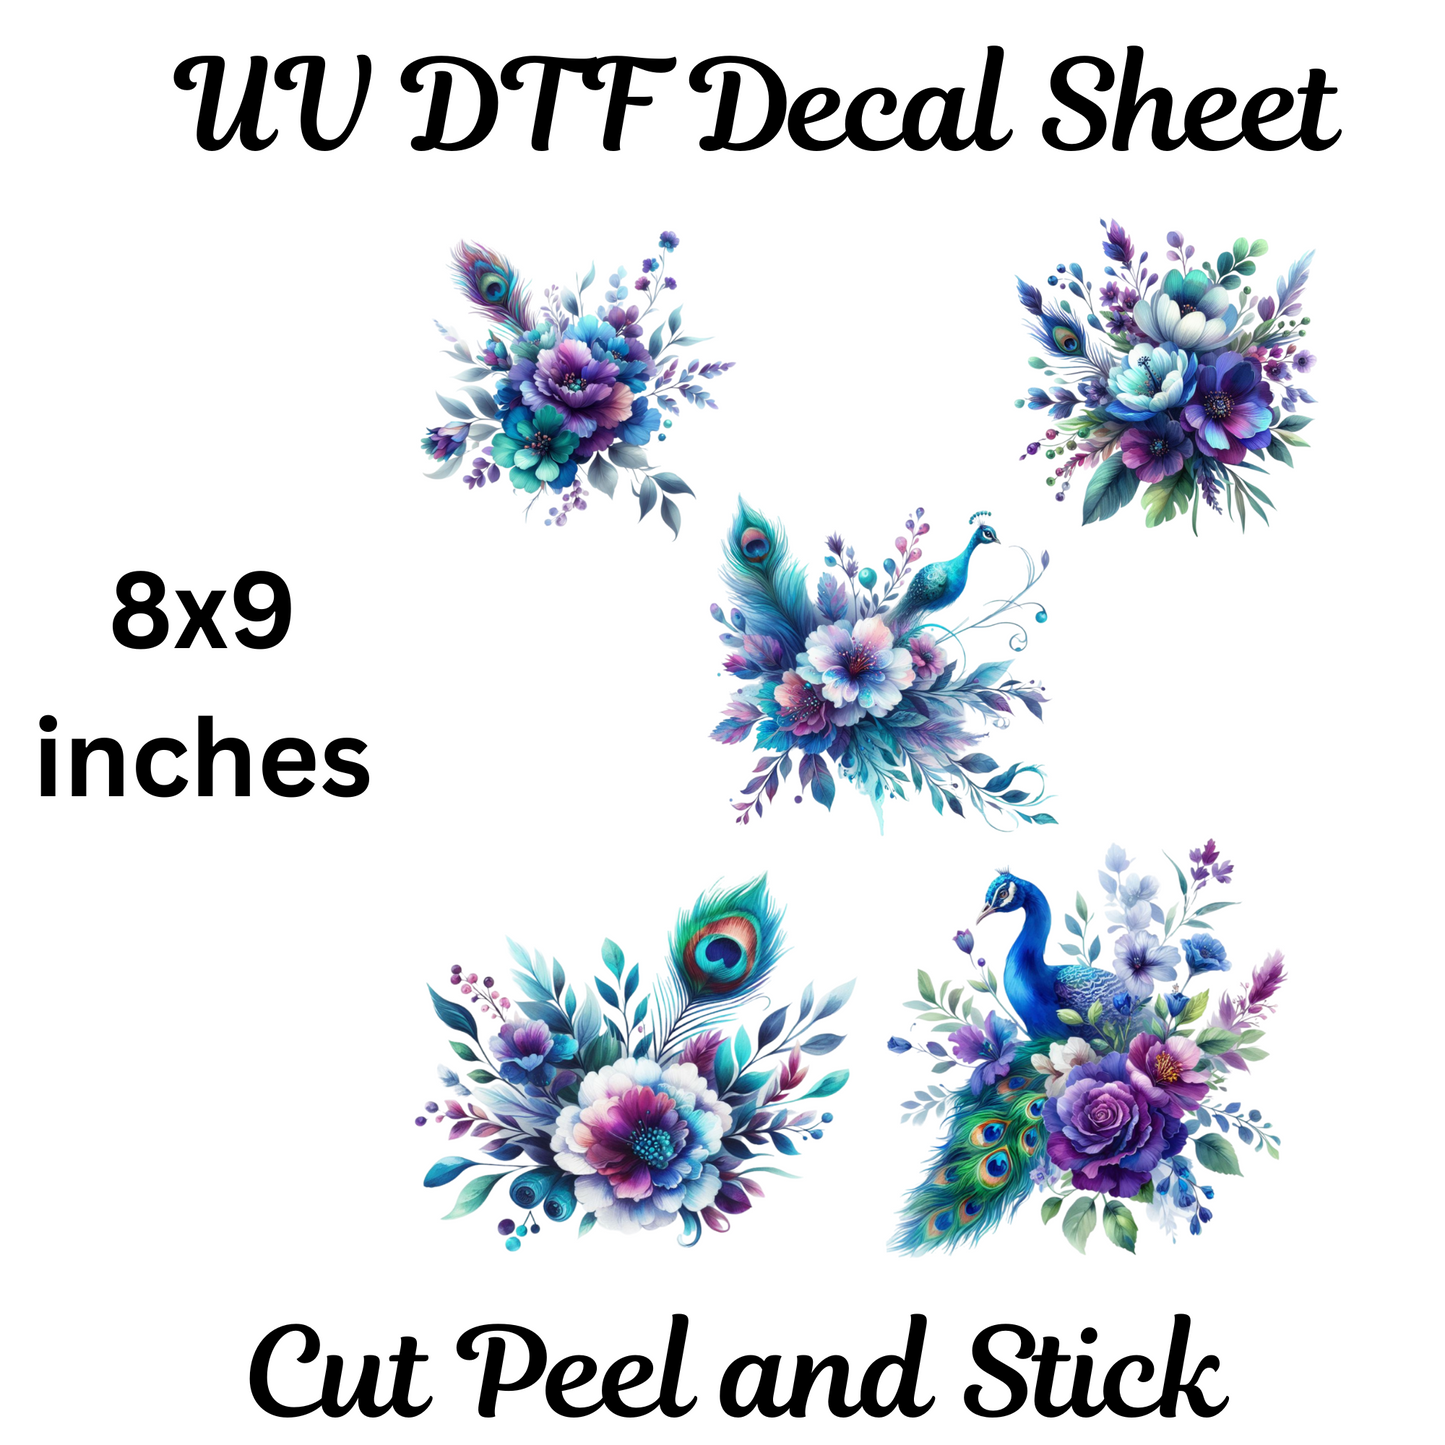 Peacock Flowers UV DTF Decal Sheet (8x9 inches)